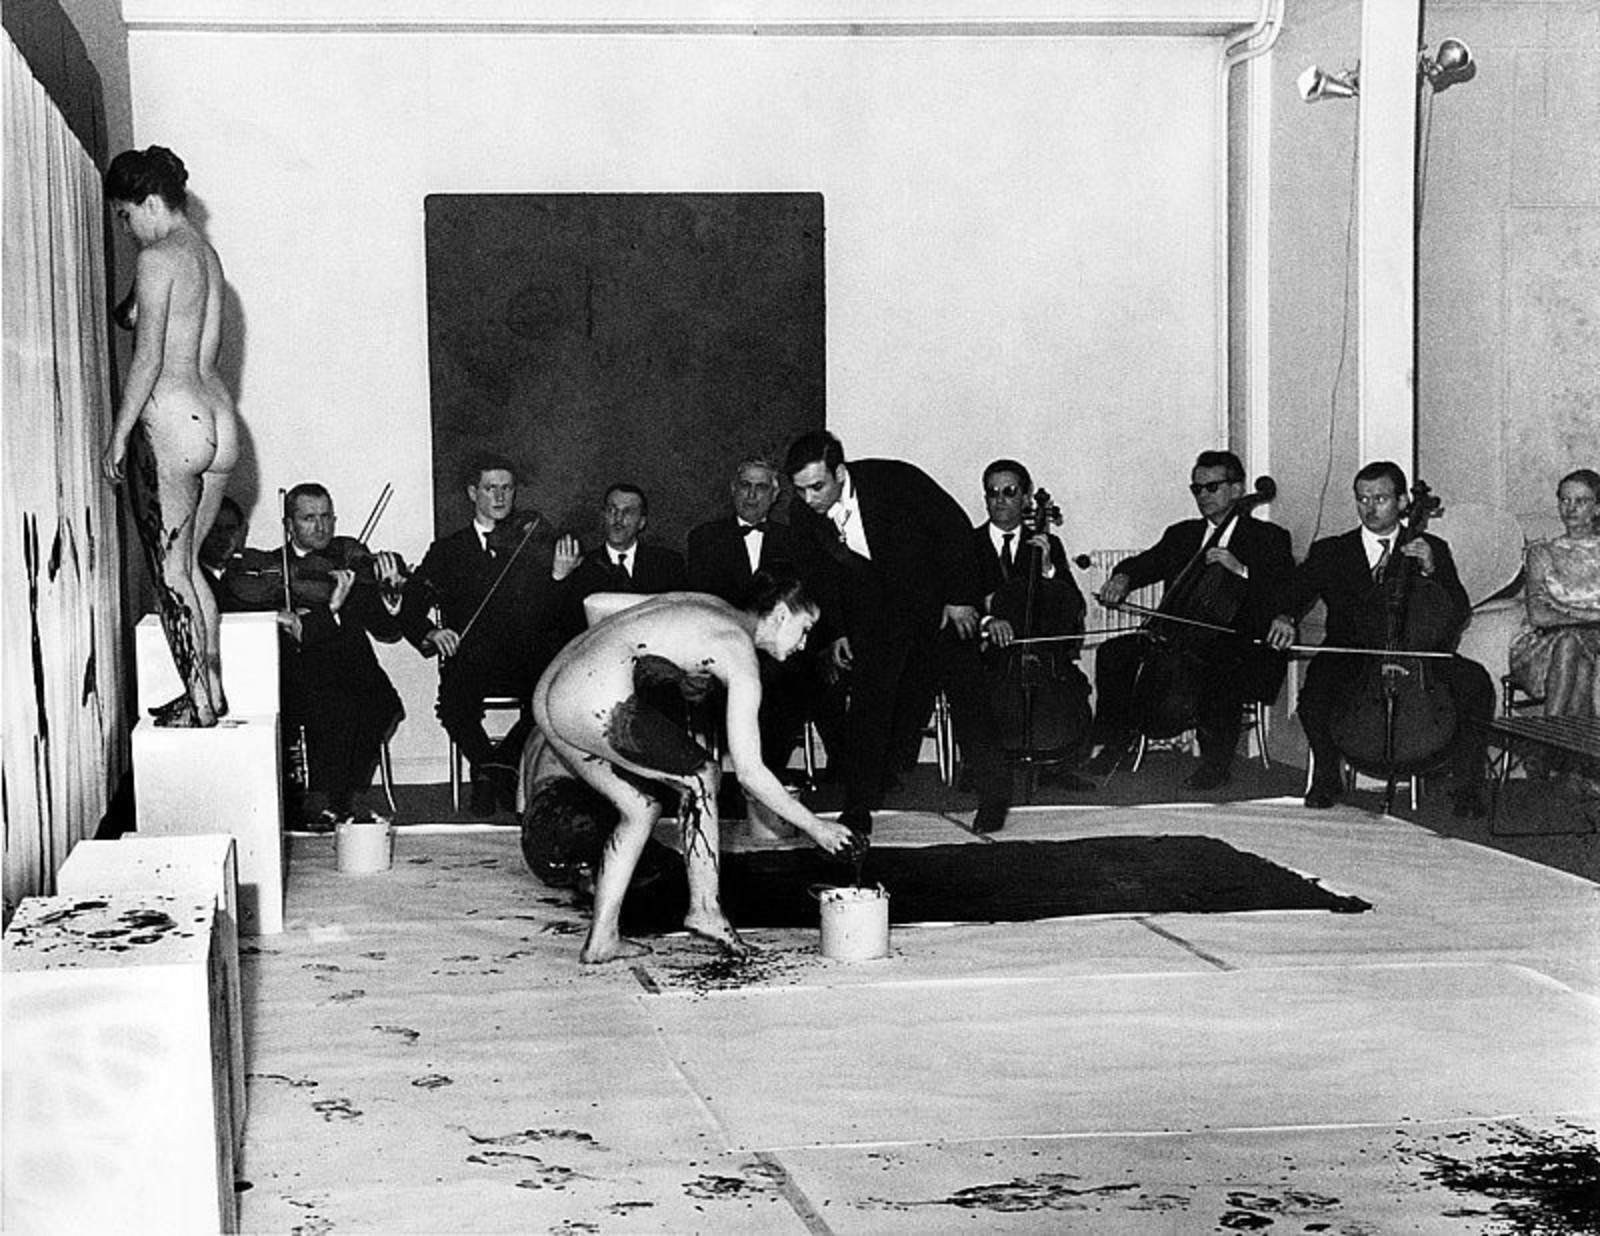 Harry Shunk. Yves Klein performance "Anthropometries of the Blue Period".1960. Showing orchestra, audience, naked models, and Klein. March 9, 1960. Gelatin silver print. 20.02 х 25.73 cm. Galerie d'Art Contemporain, Paris